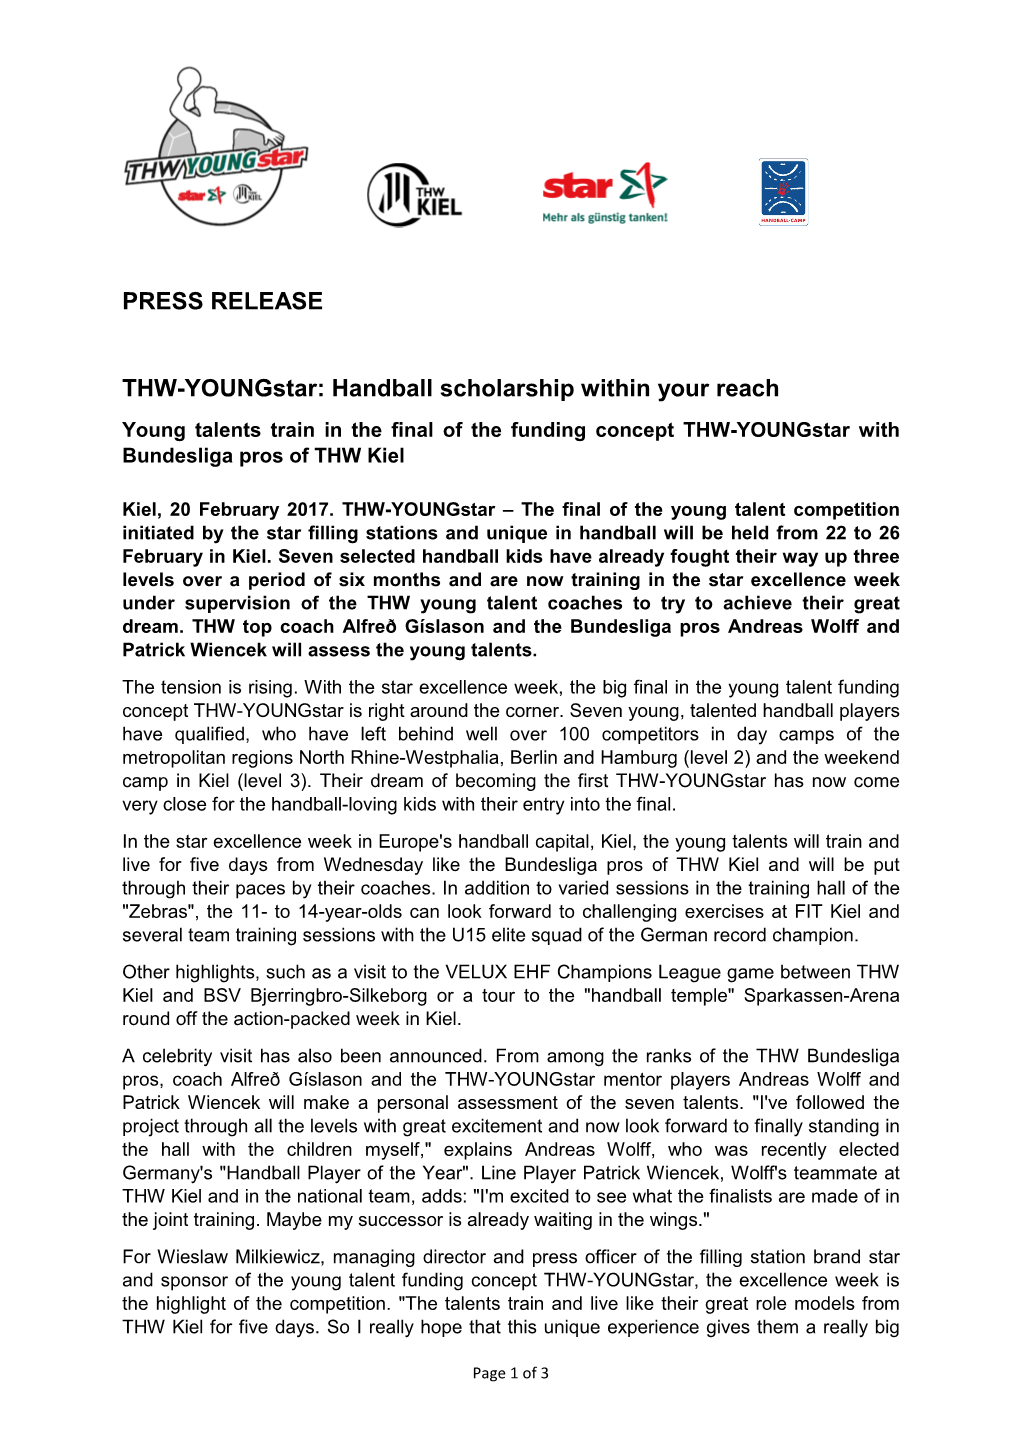 PRESS RELEASE THW-Youngstar